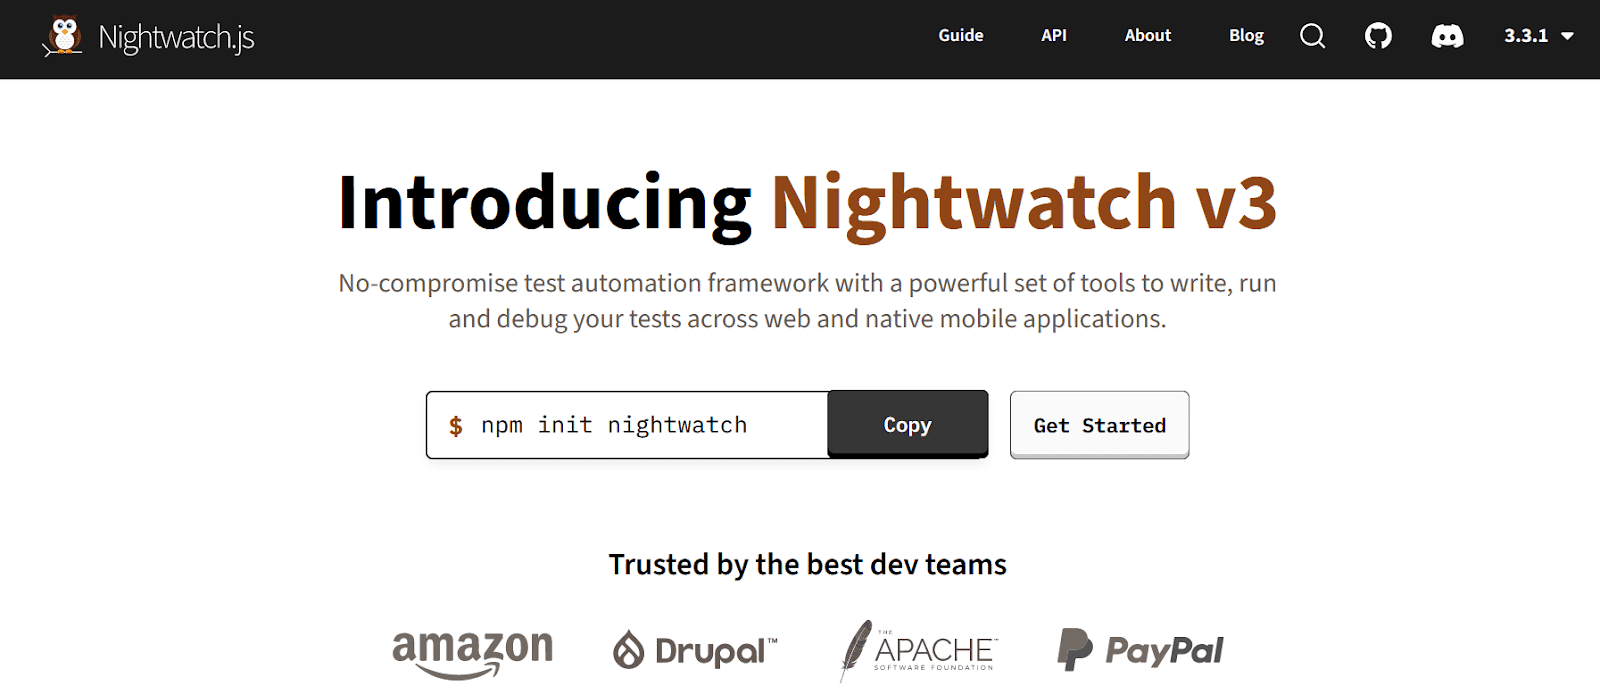 Nightwatch.js is a free, open-source automated testing framework